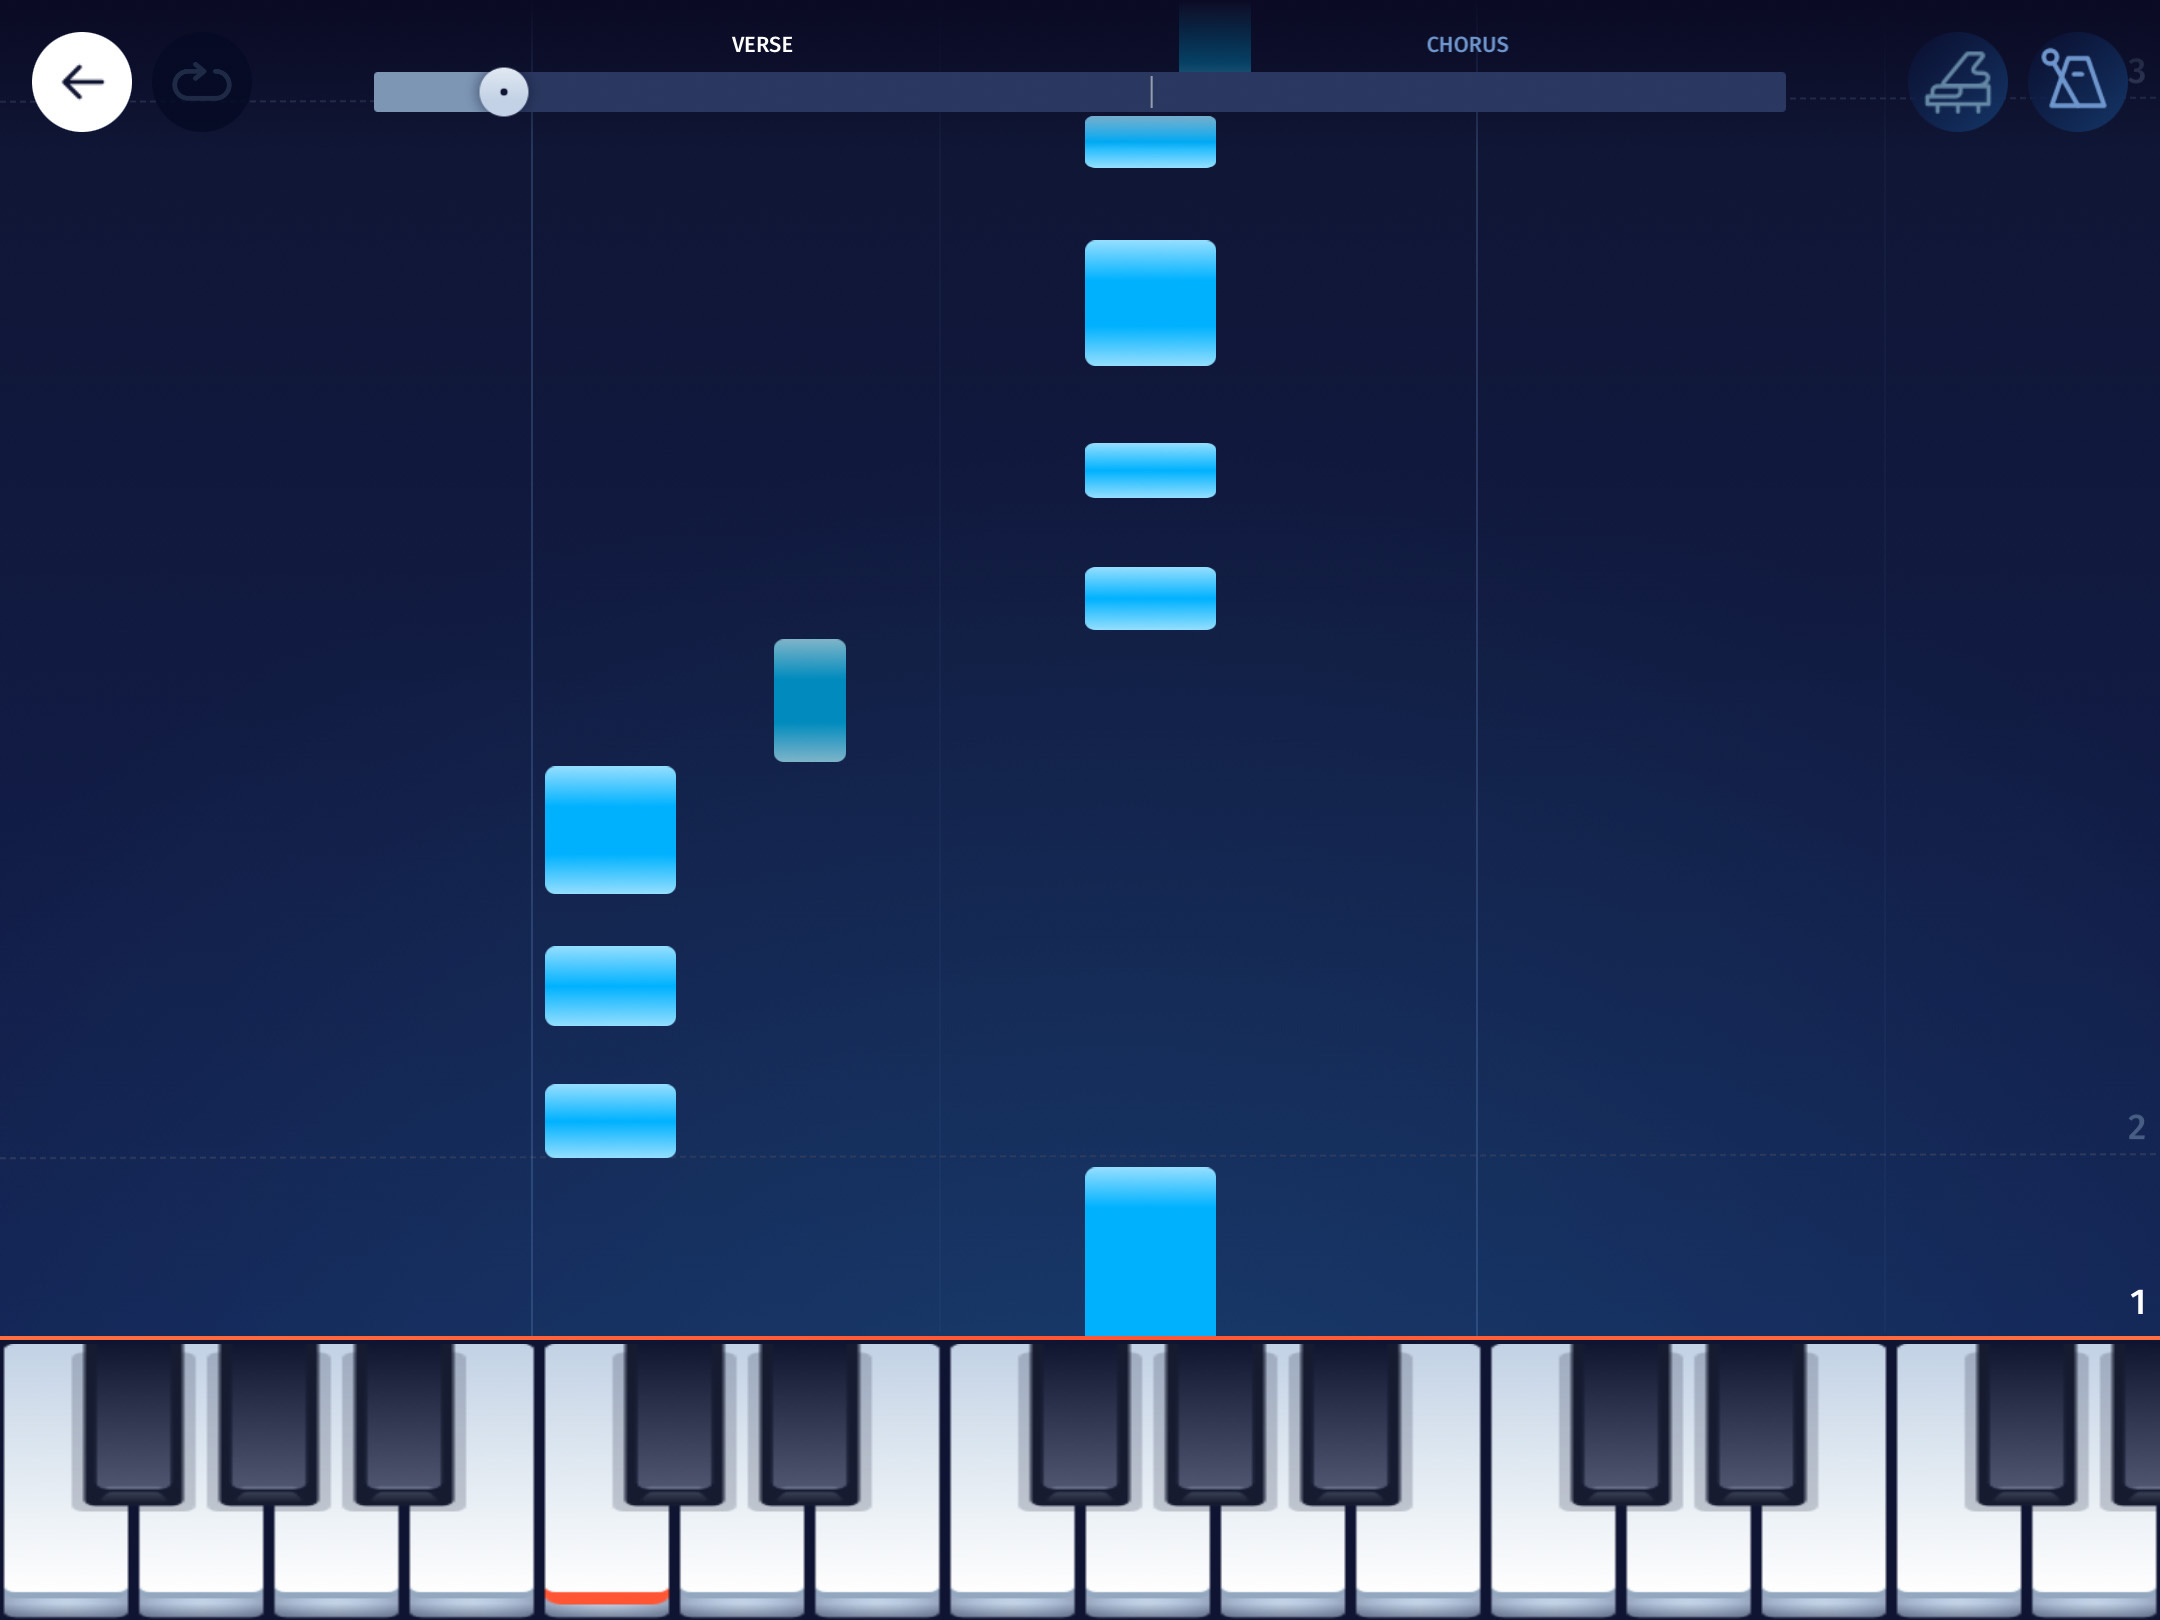 Online Multiplayer Piano: Anonymous 